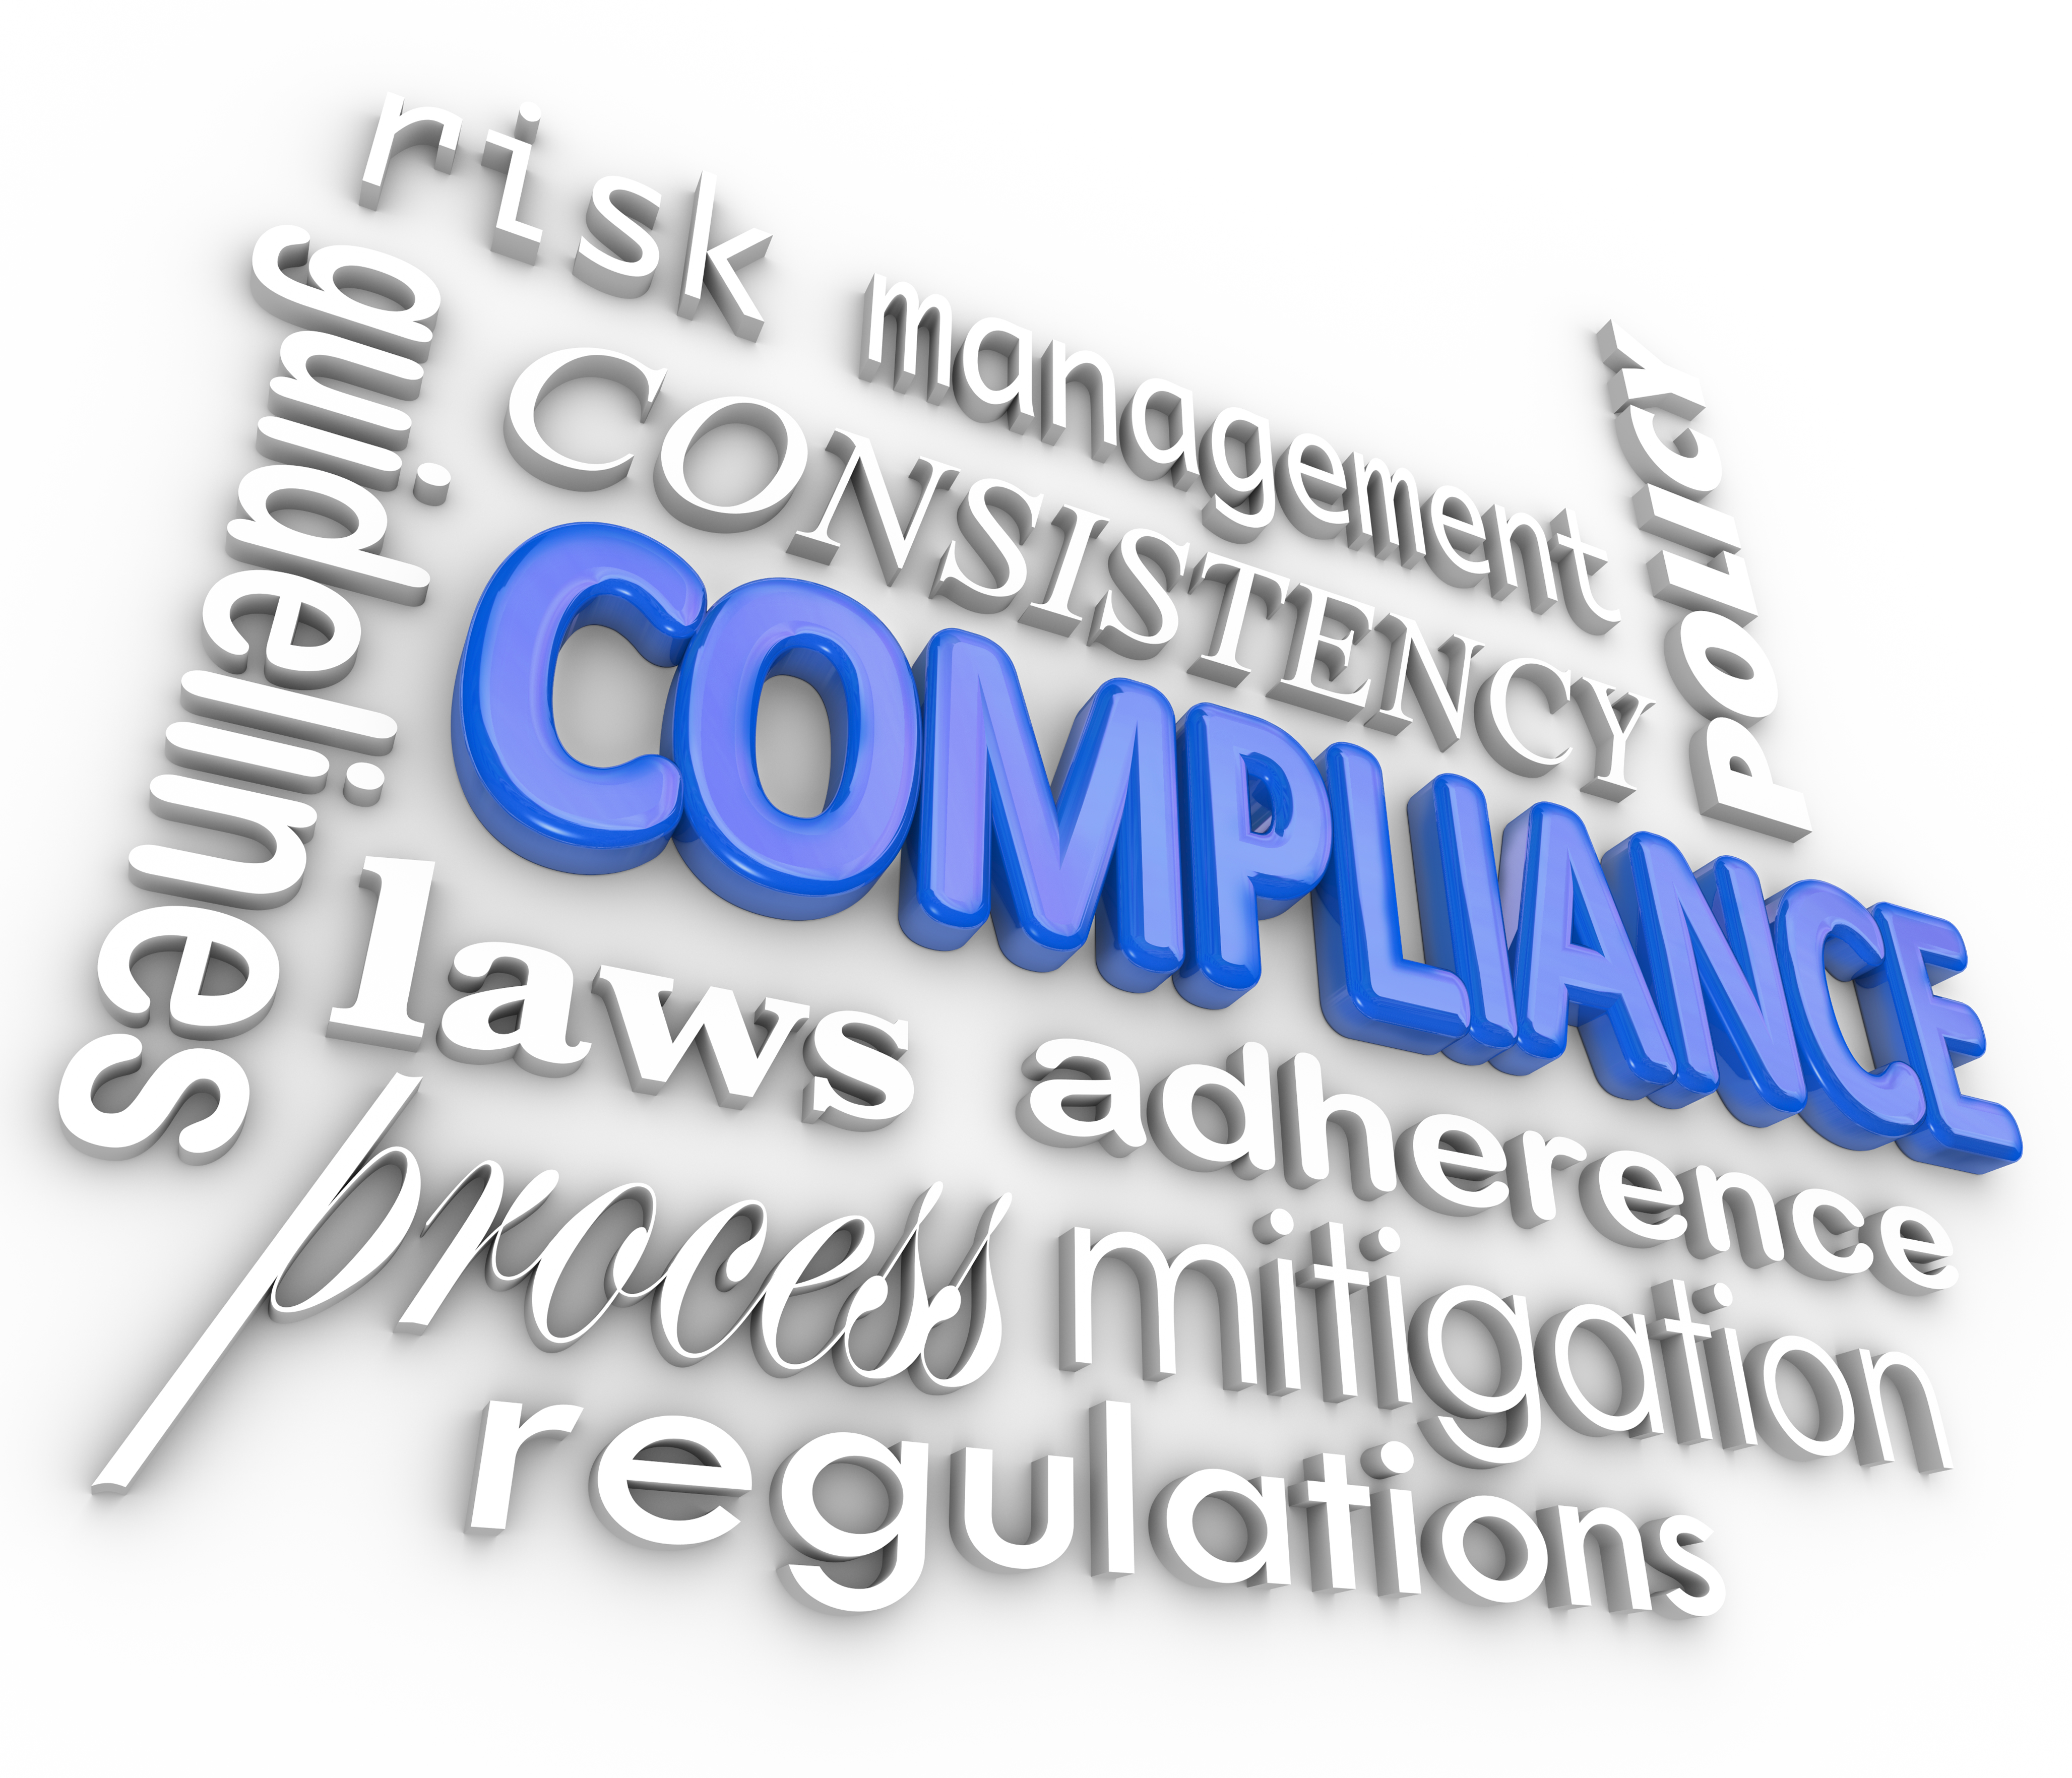 Compliance risk analysis